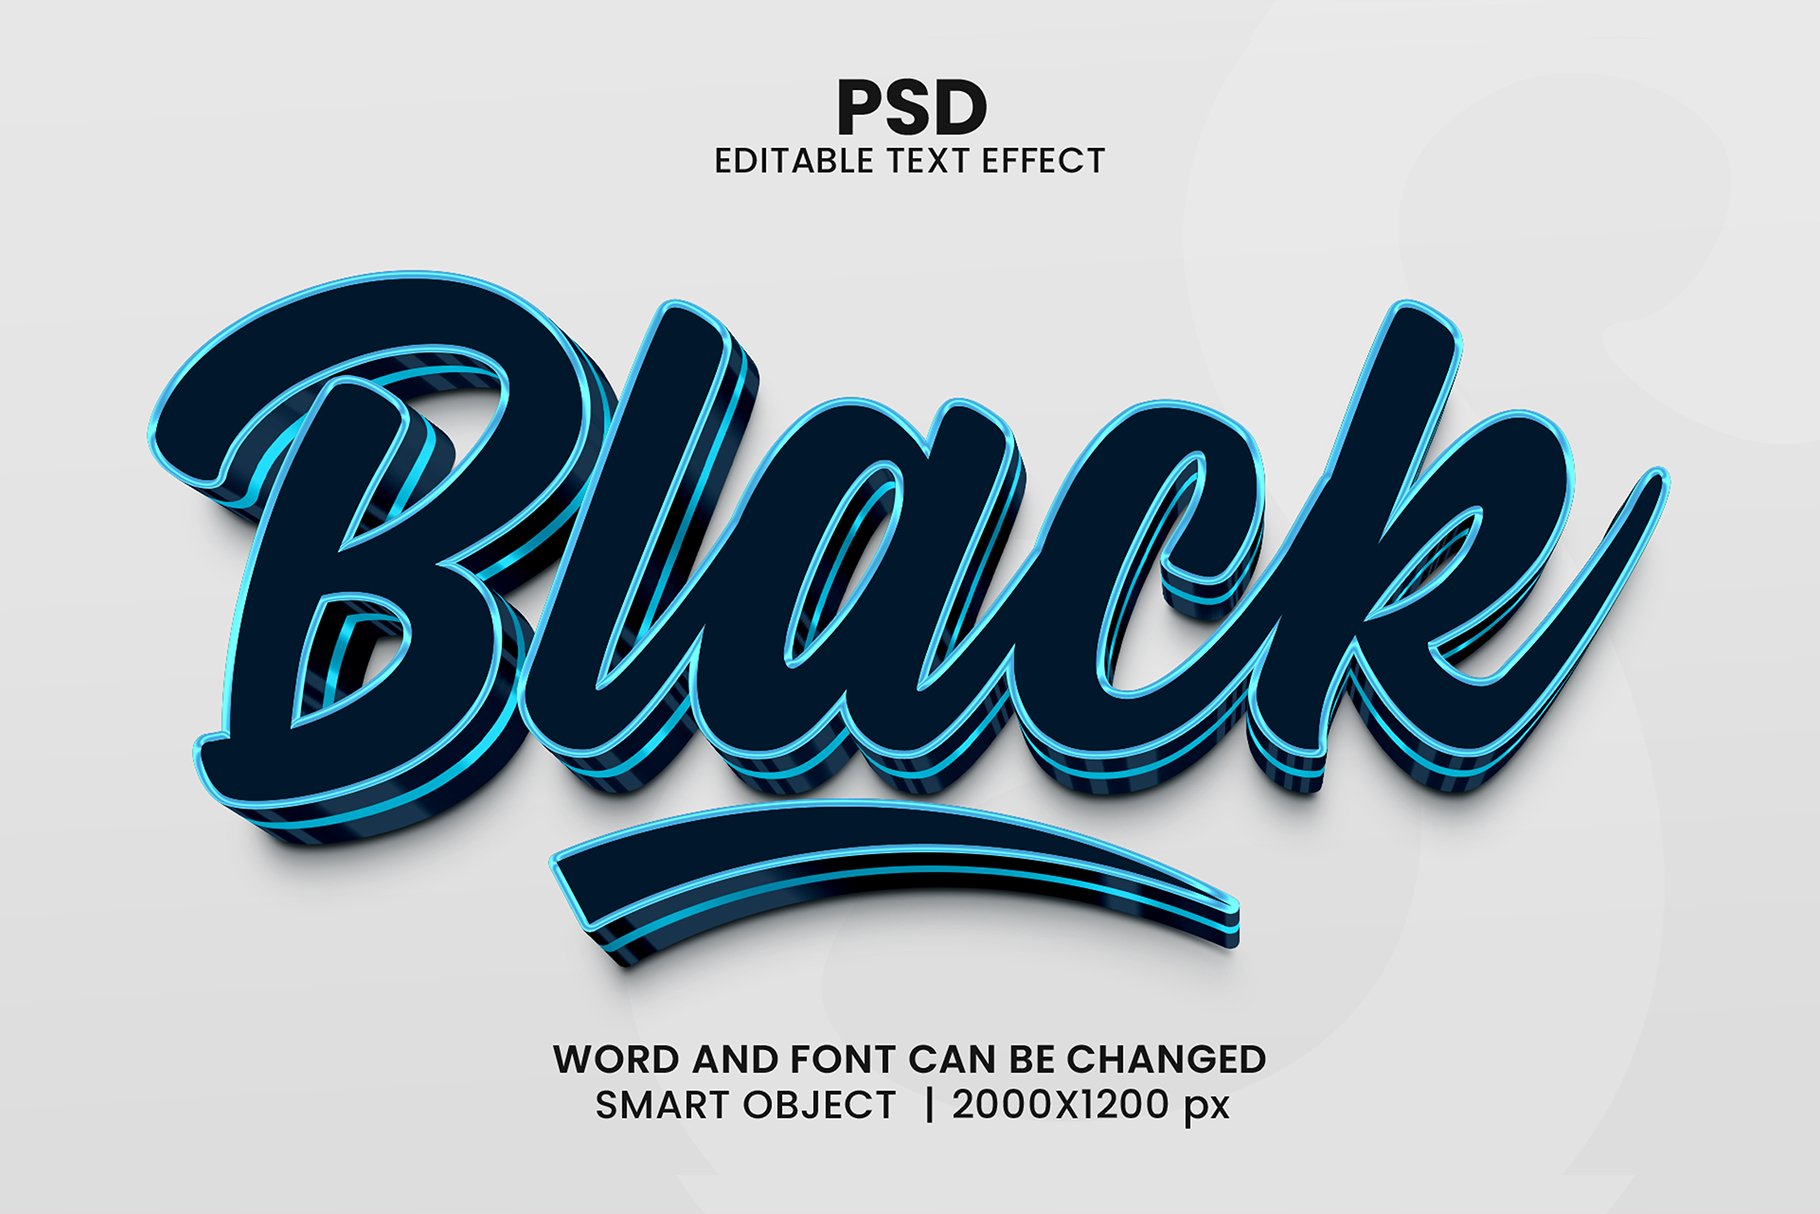 Black 3d Editable Text Effect Stylecover image.